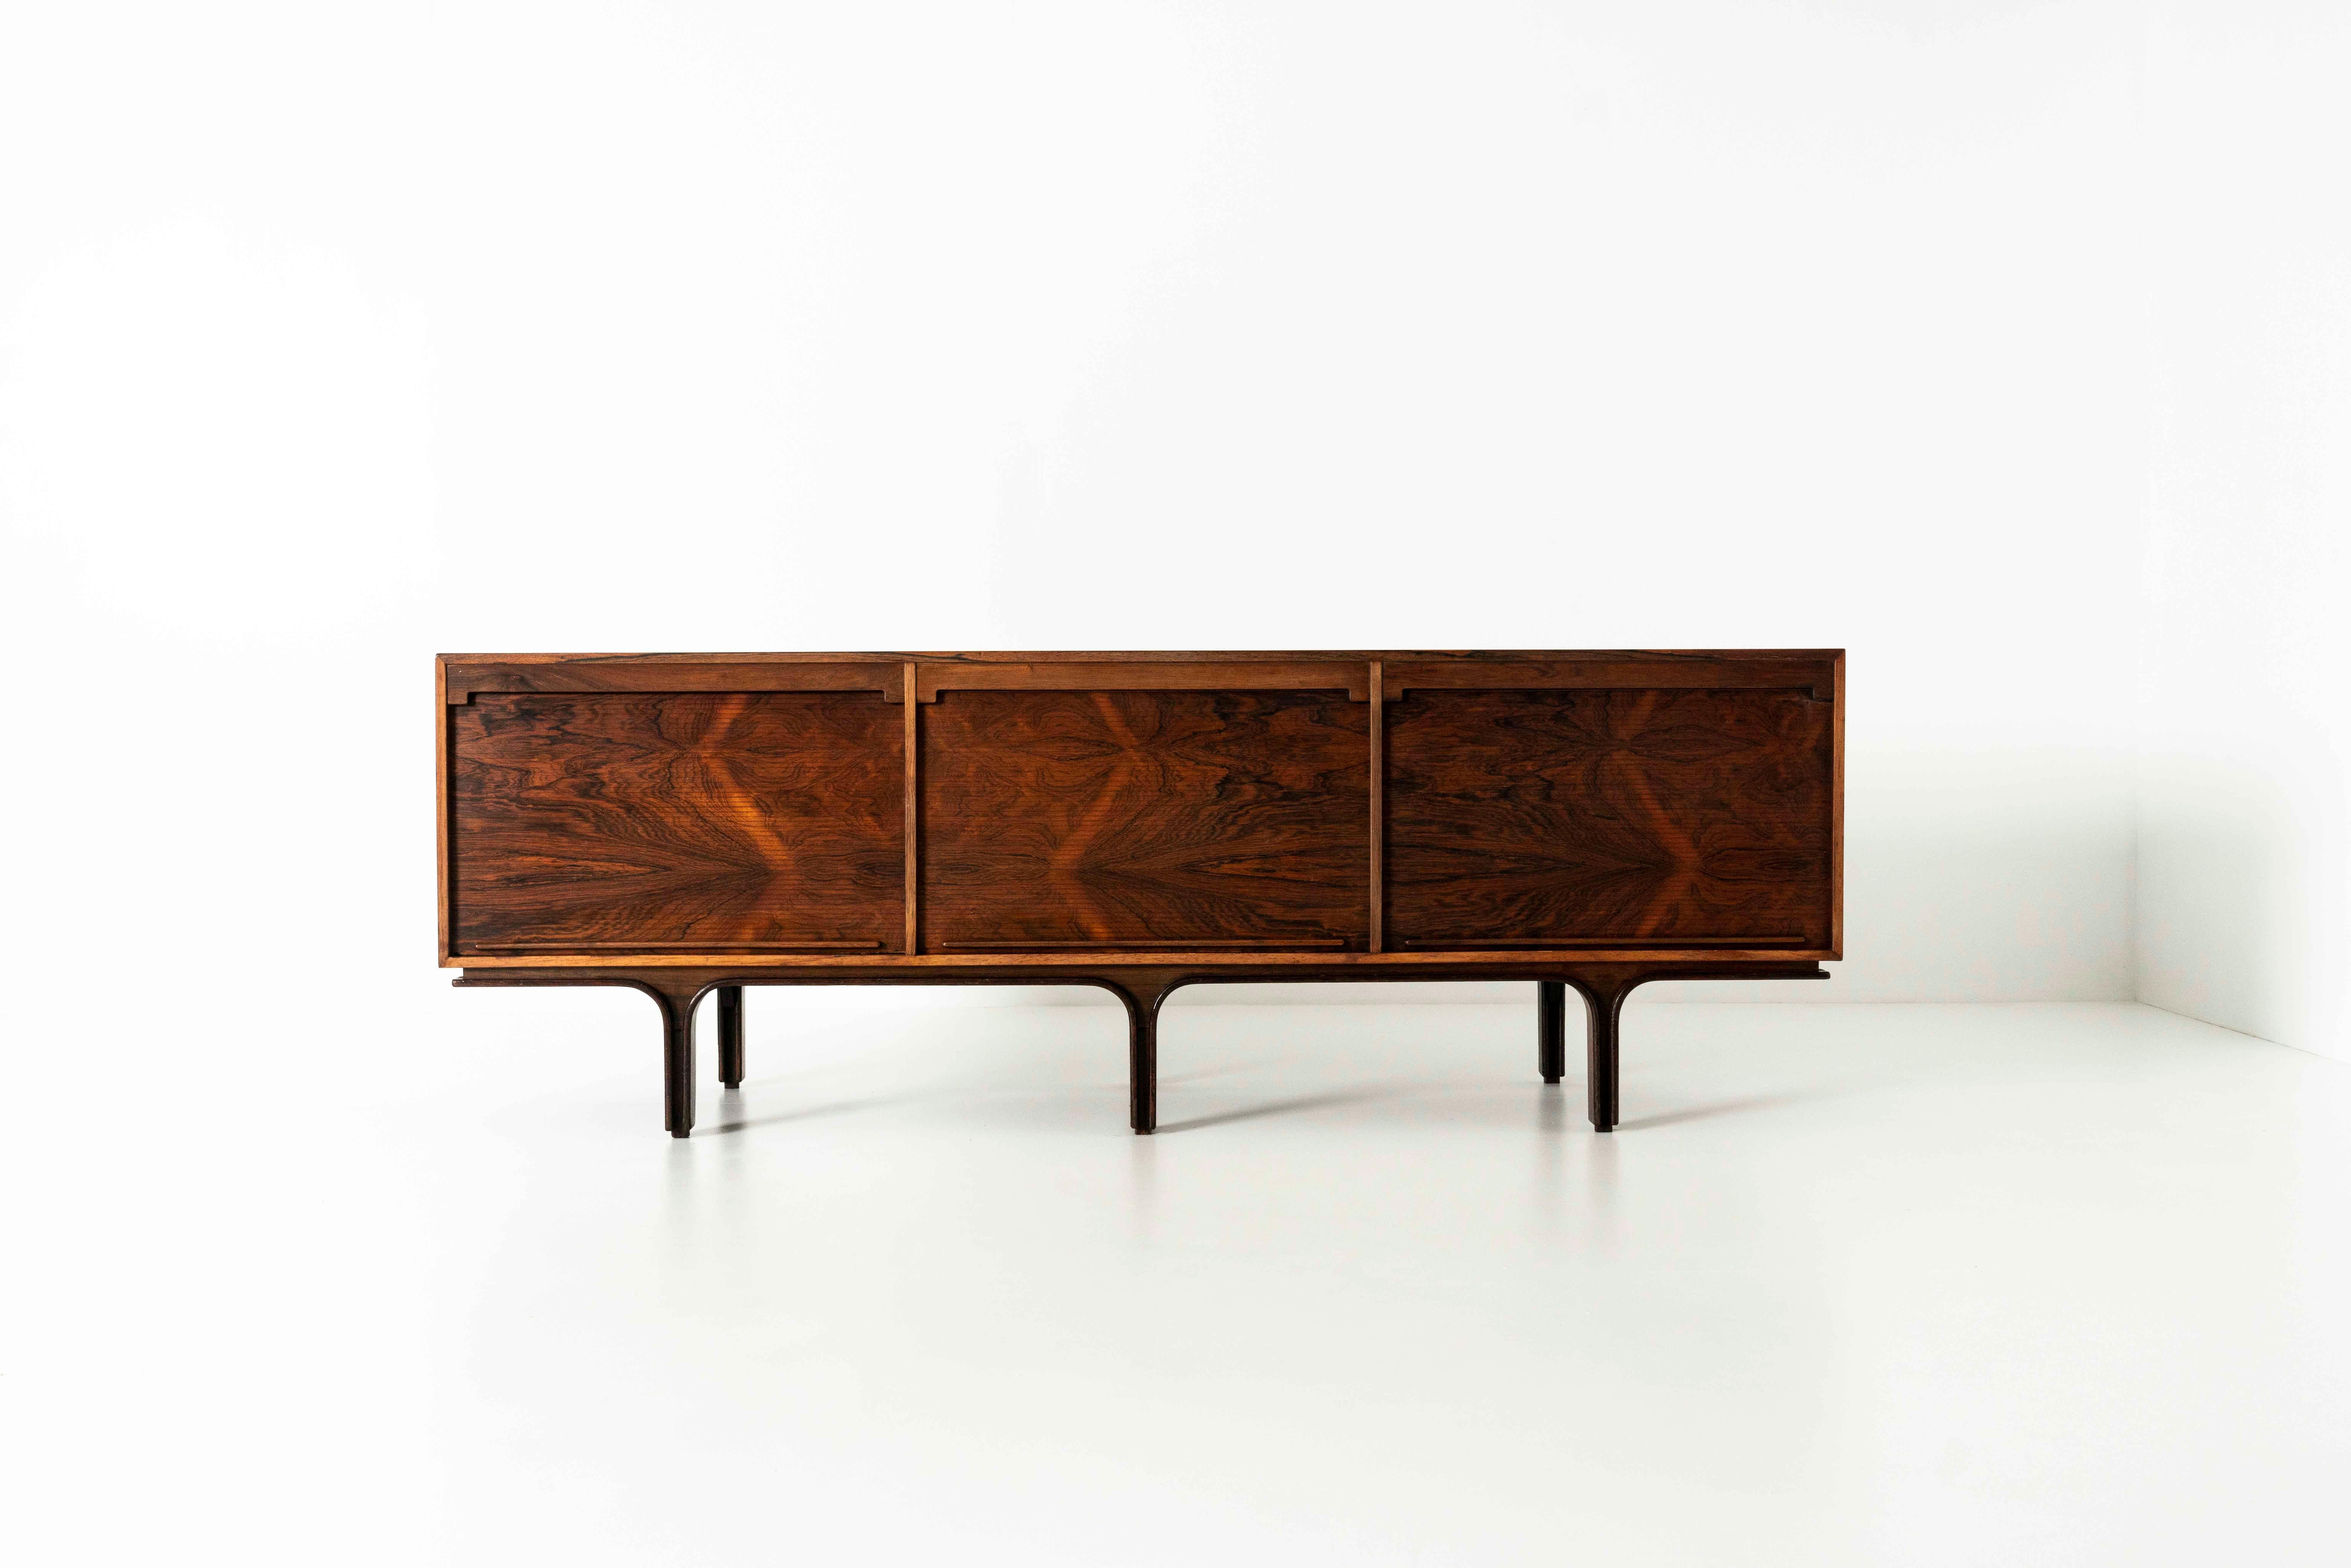 Amazing sideboard in rosewood by Gianfranco Frattini for Bernini from Italy, 1963. The sideboard has three tambour doors. Behind the left are four drawers and the top is clearly marked with 'Bernini'. The middle and right doors have shelves behind